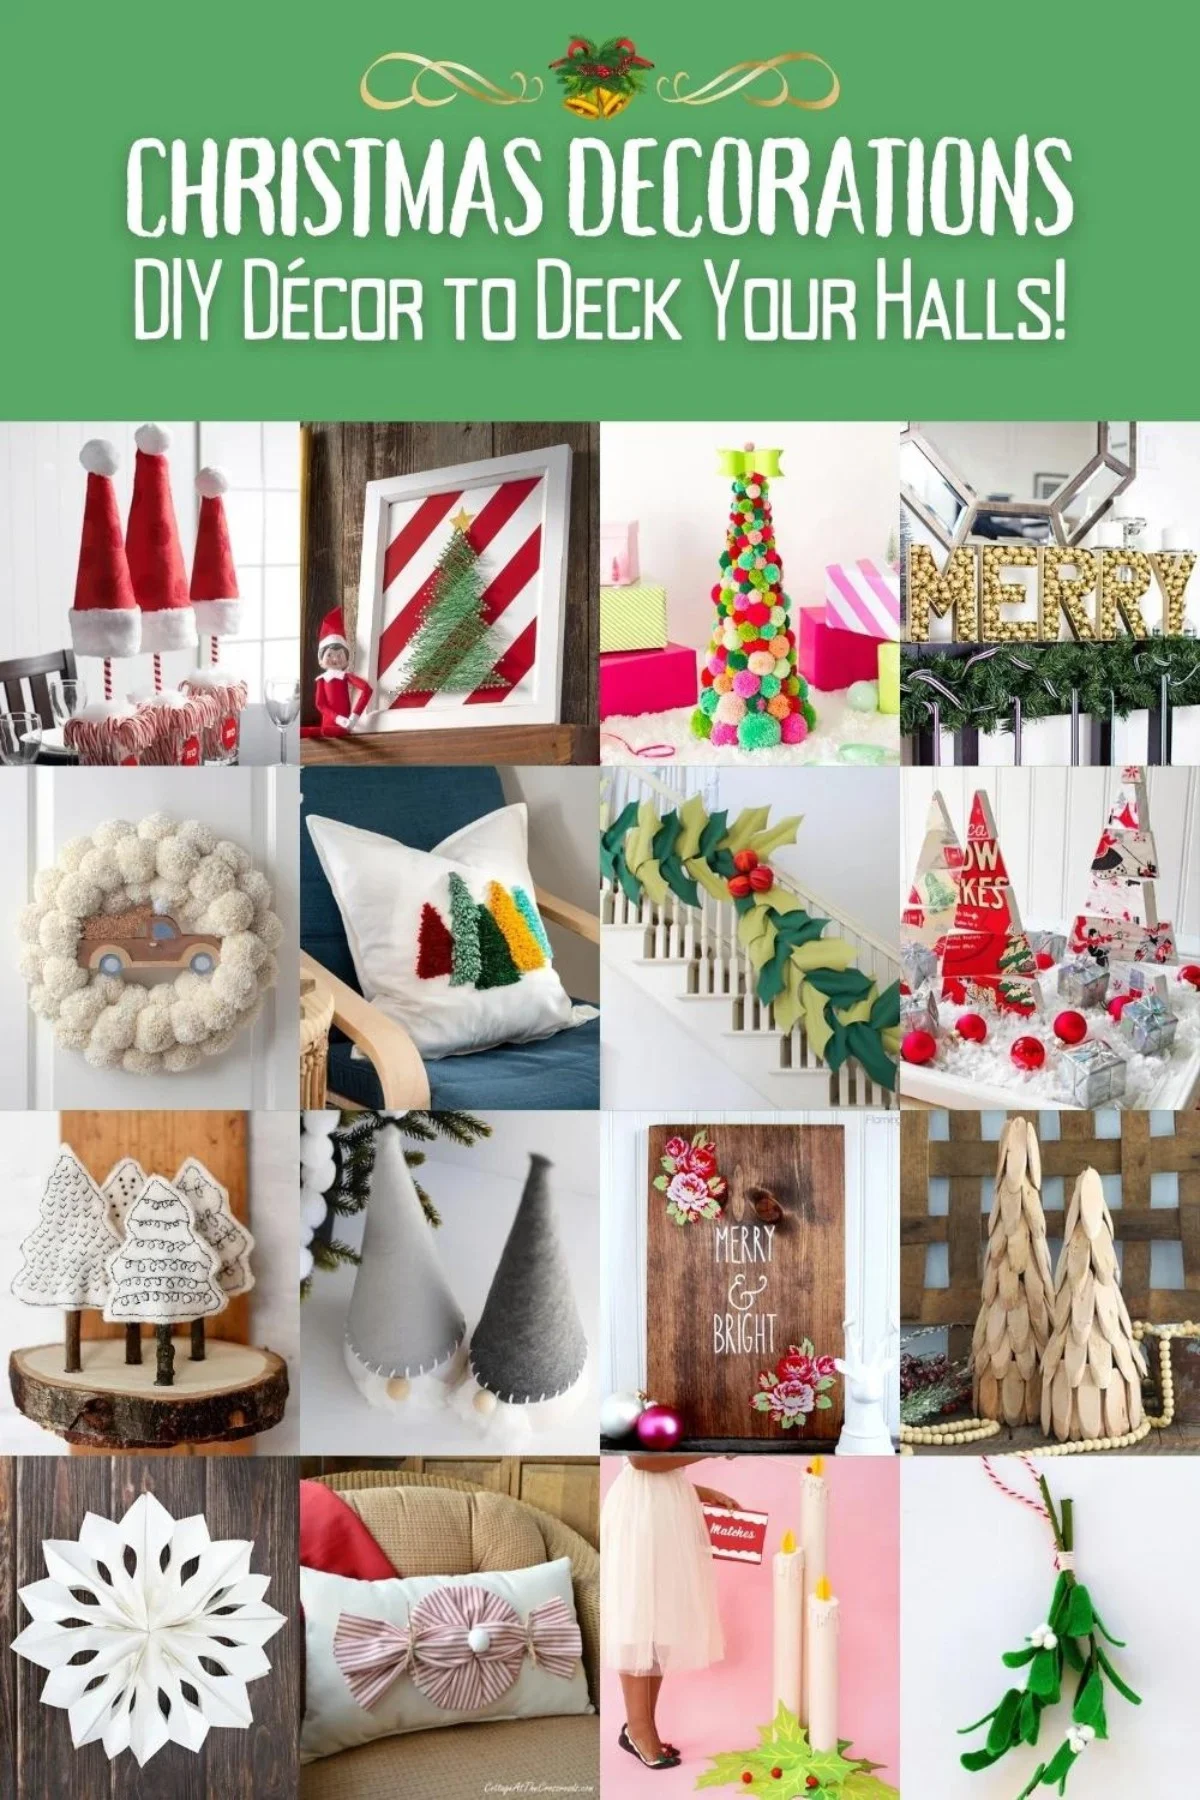 Deck Your Halls Over 50 Diy Christmas Decorations To Make Candy